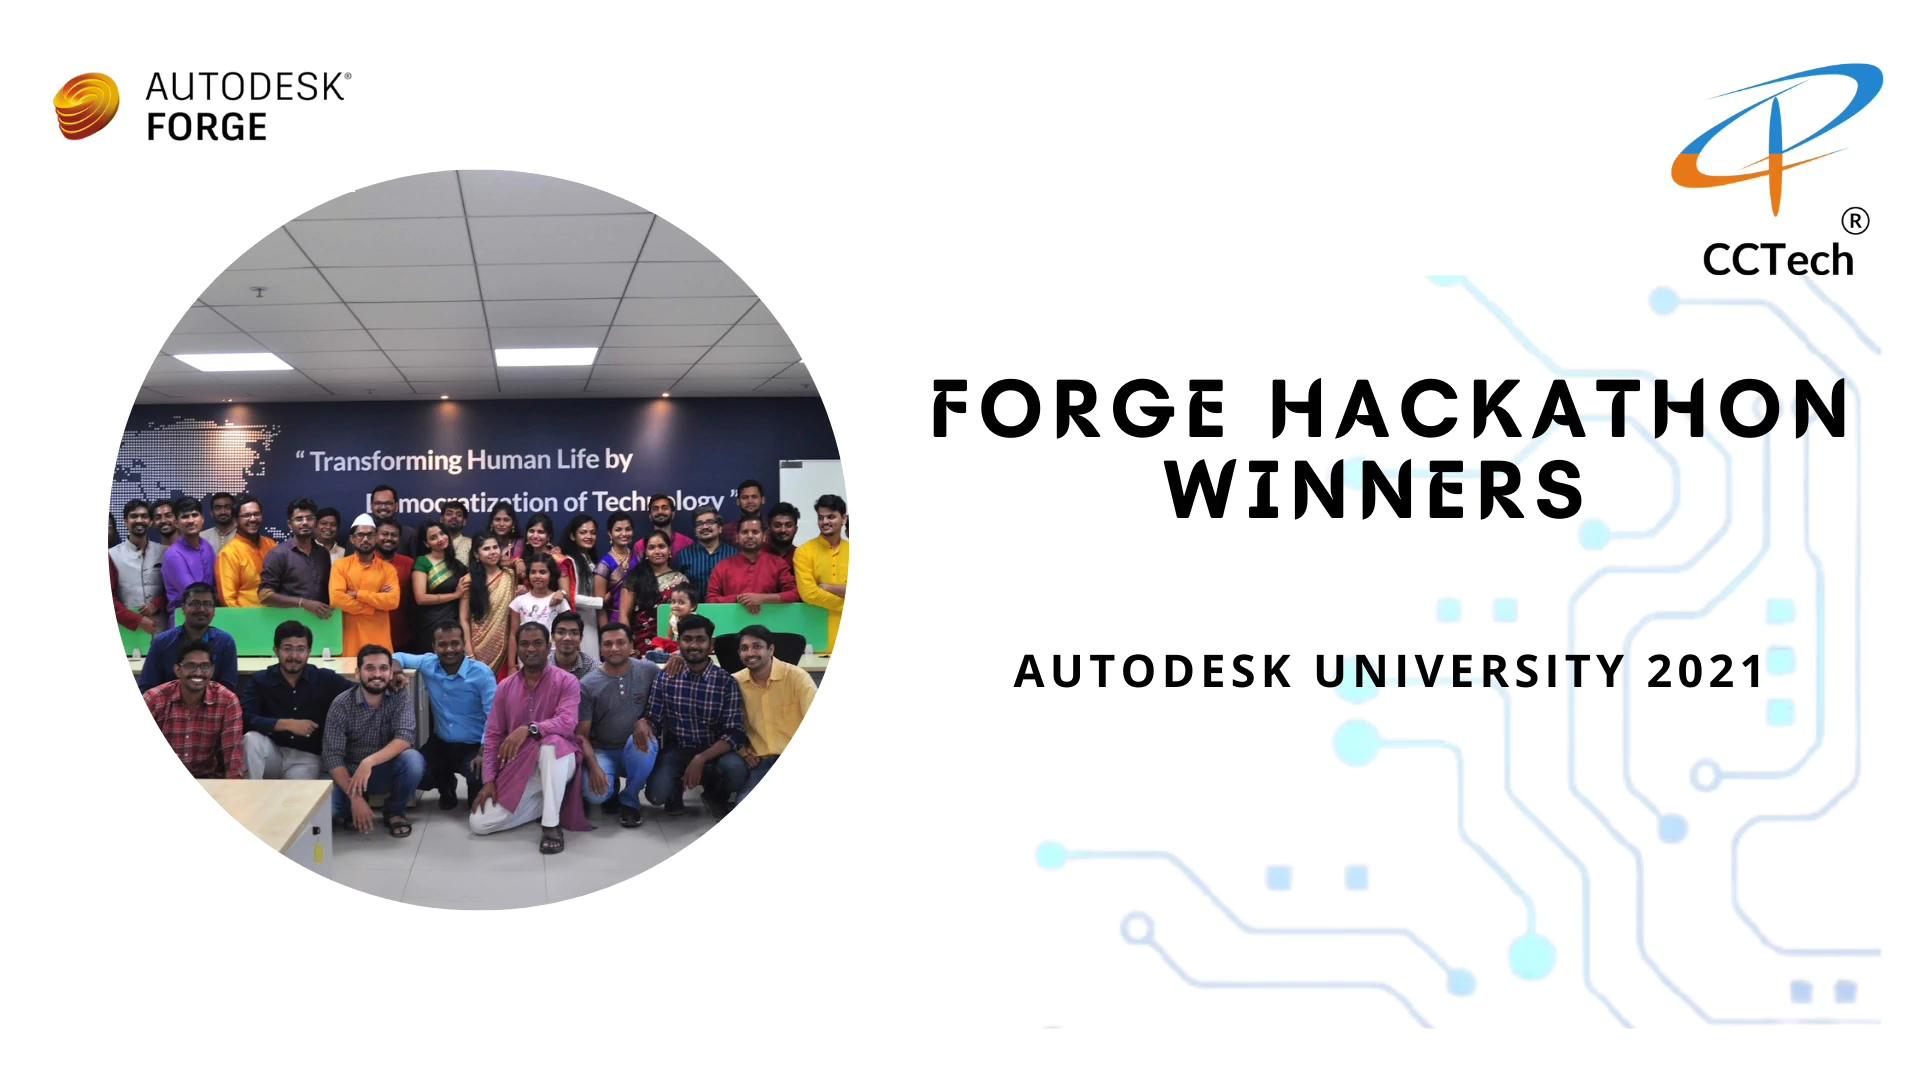 CCTech emerges as a winner in 2 categories of Autodesk Forge Hackathon 2021